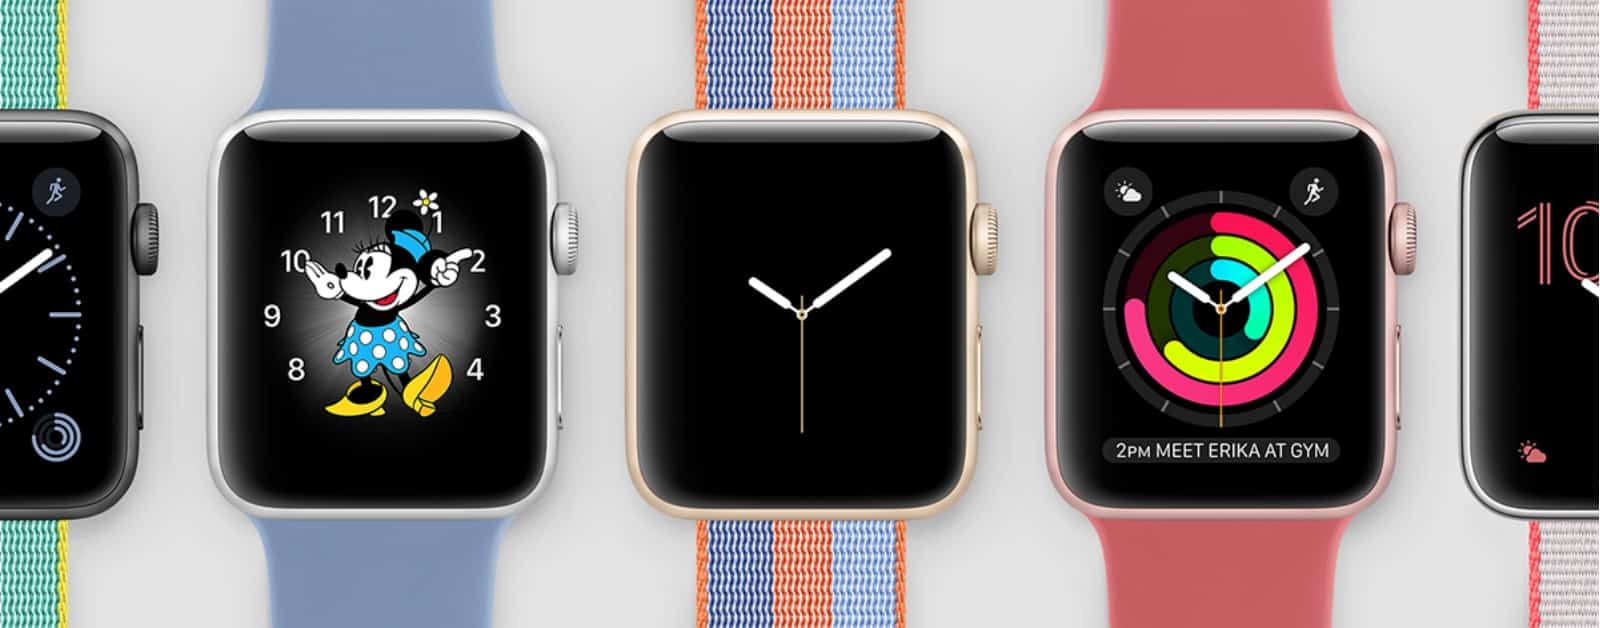 Image of series 0 Apple Watches.